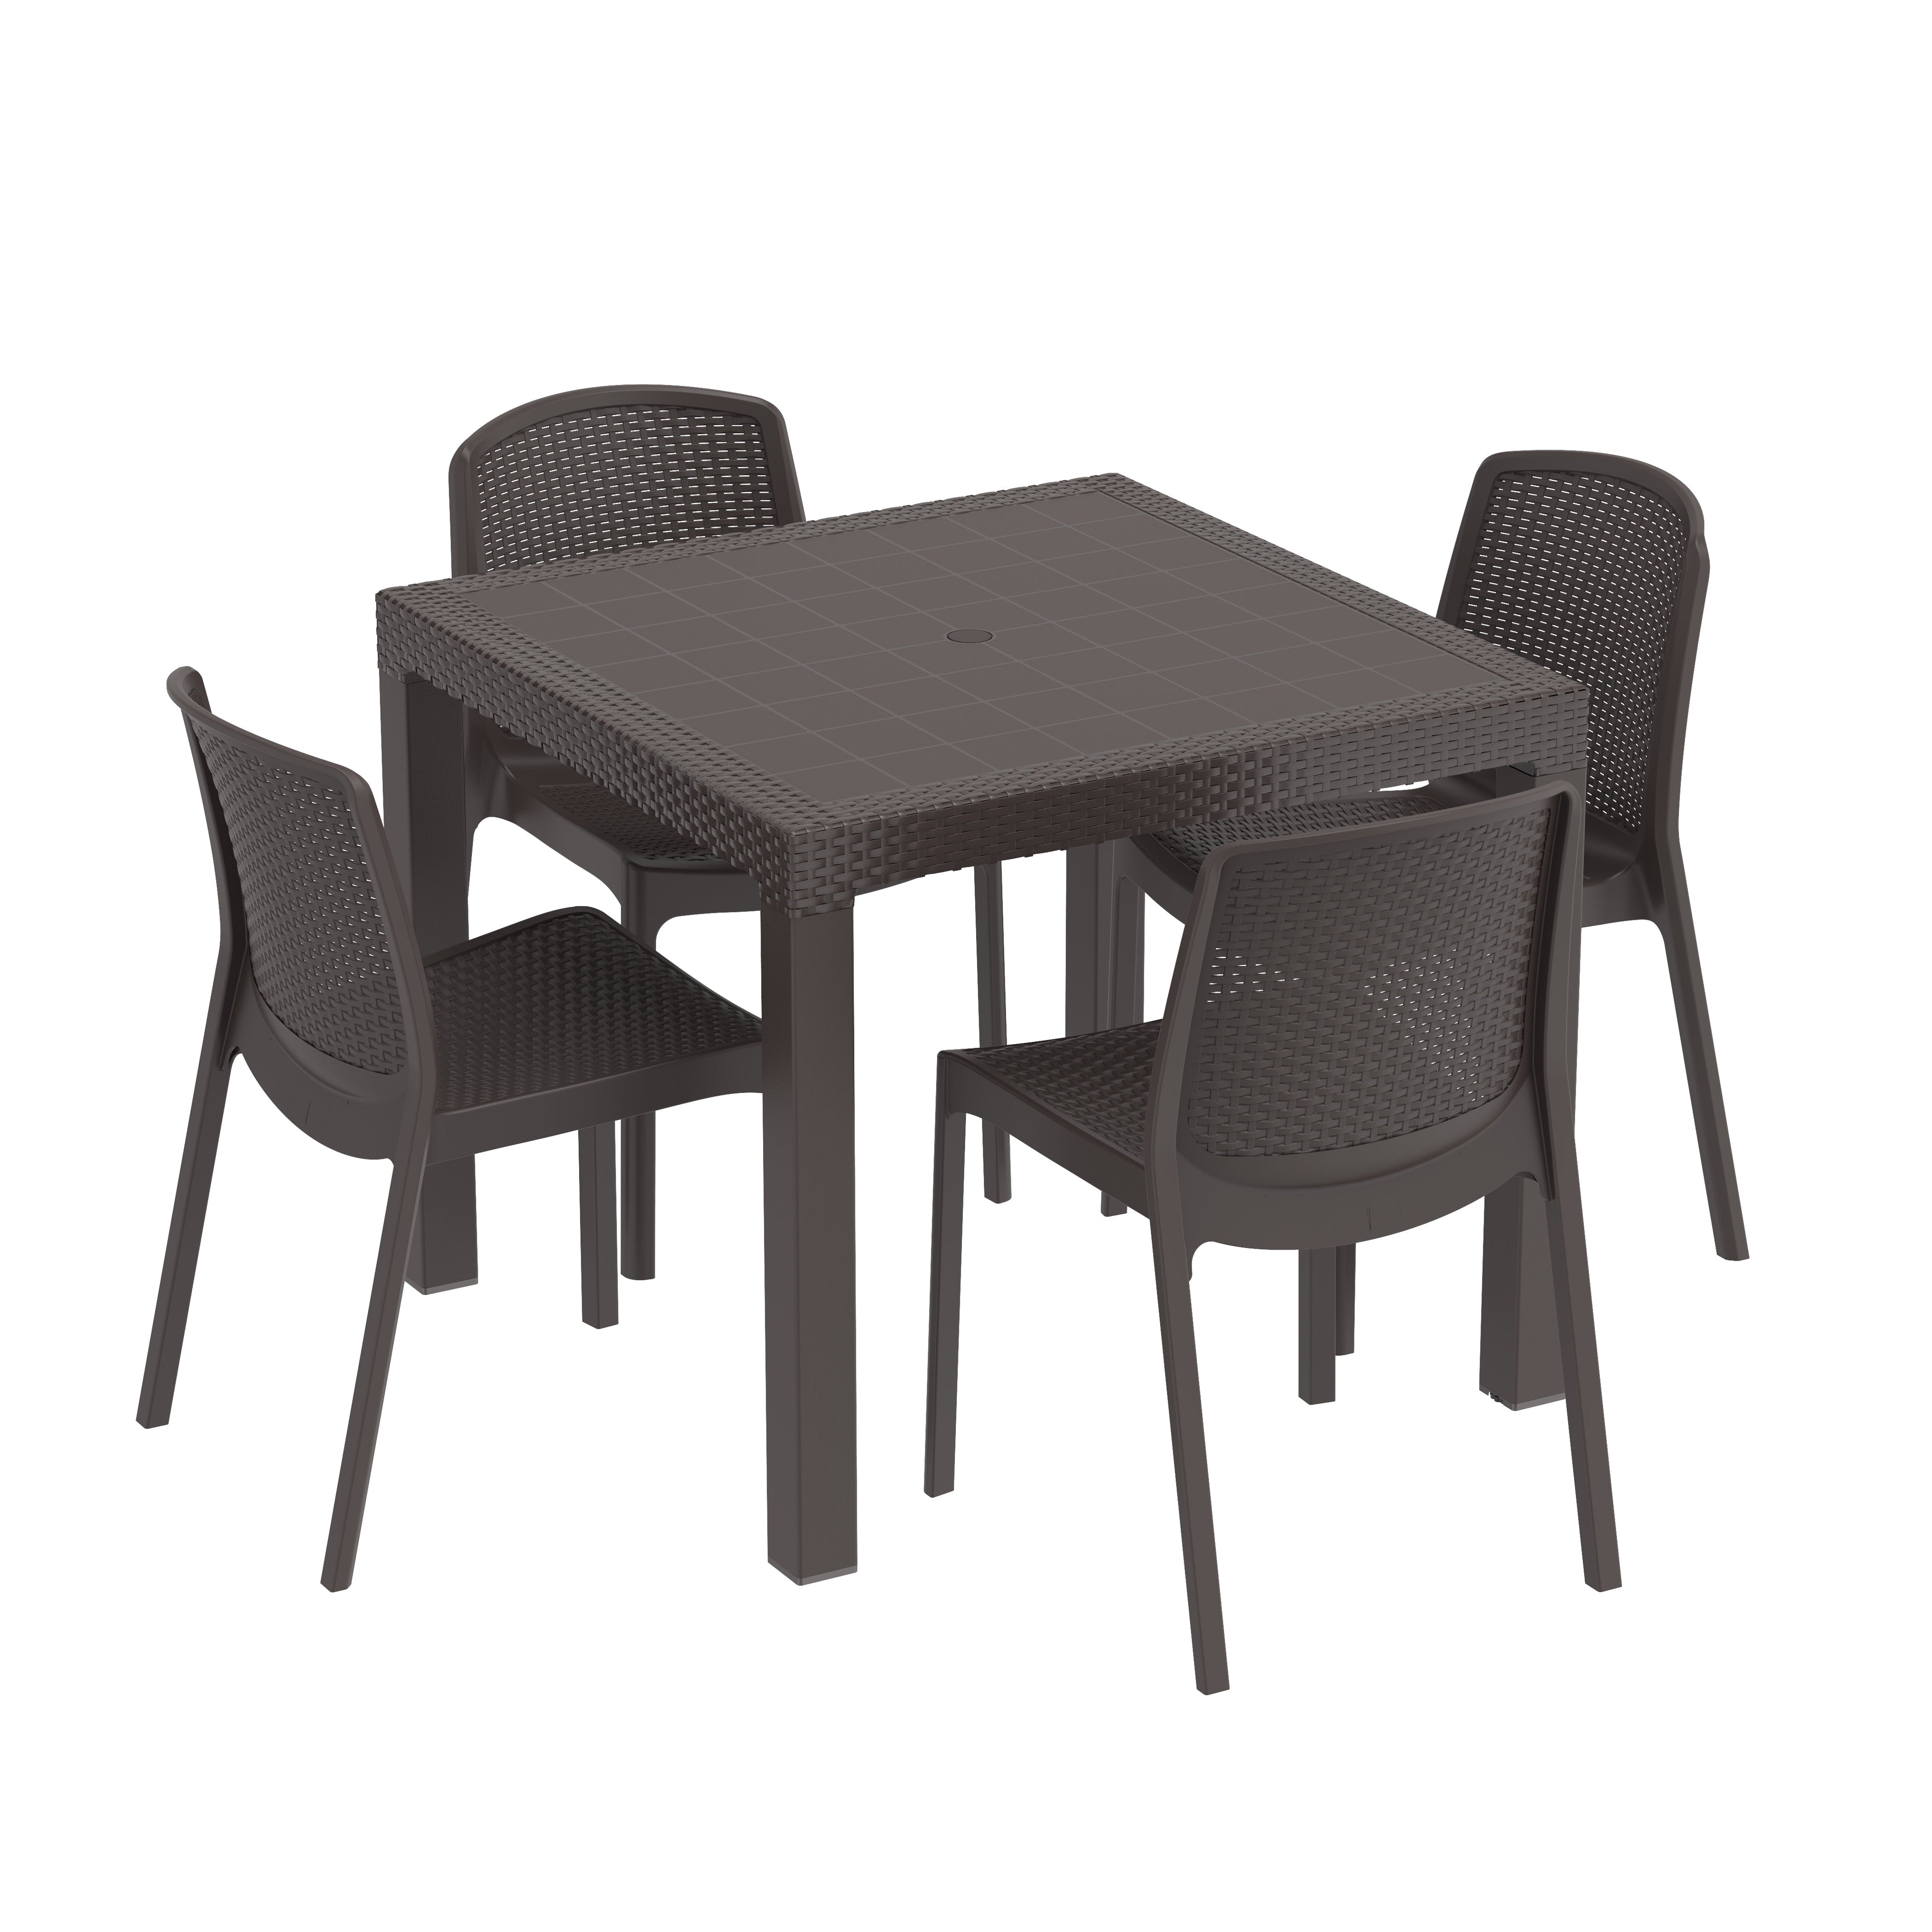 Durasheds Duramax Rattan Square Table with 4 Duramax Chairs for the Backyard, Garden and Patio (2 Colors)